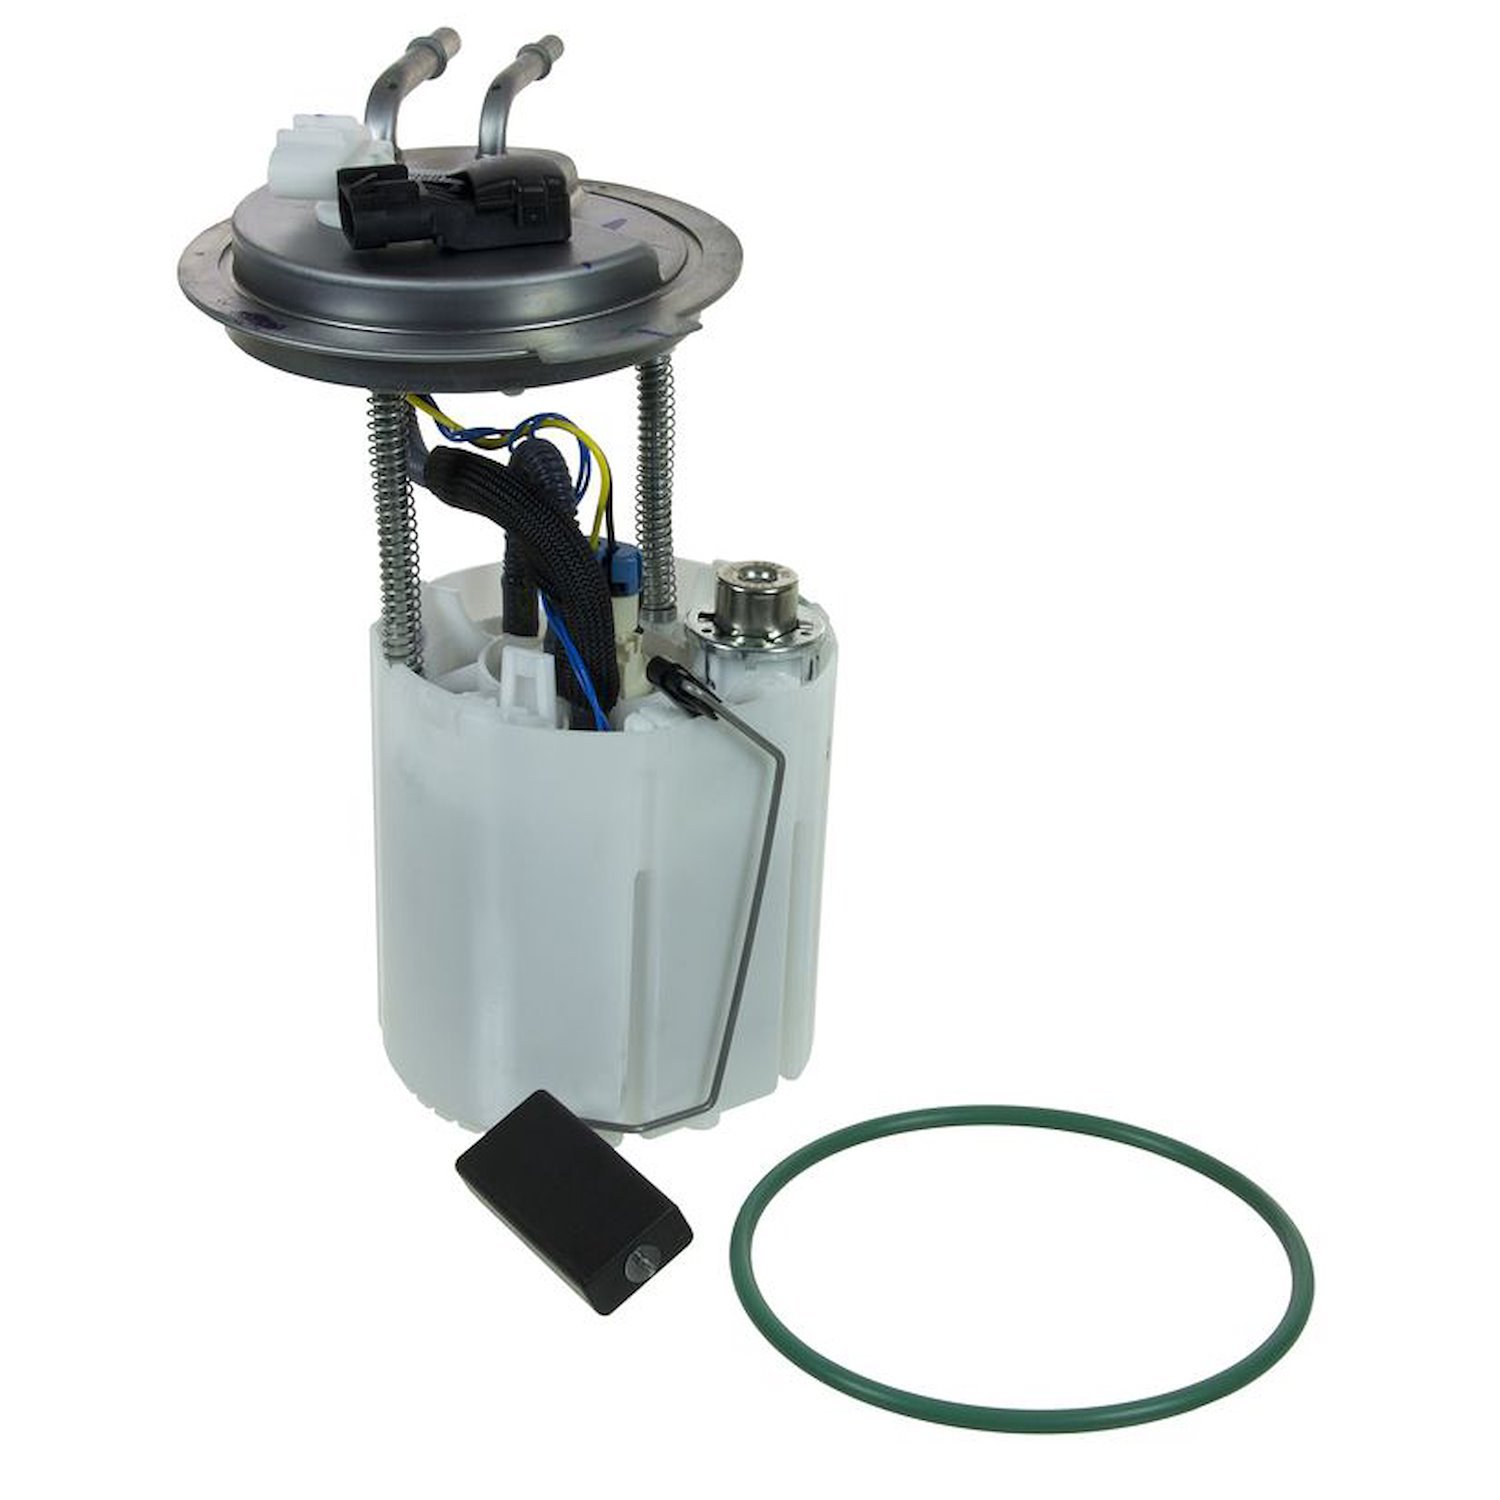 OE GM Replacement Electric Fuel Pump Module Assembly for 2009-2014 GM SUV